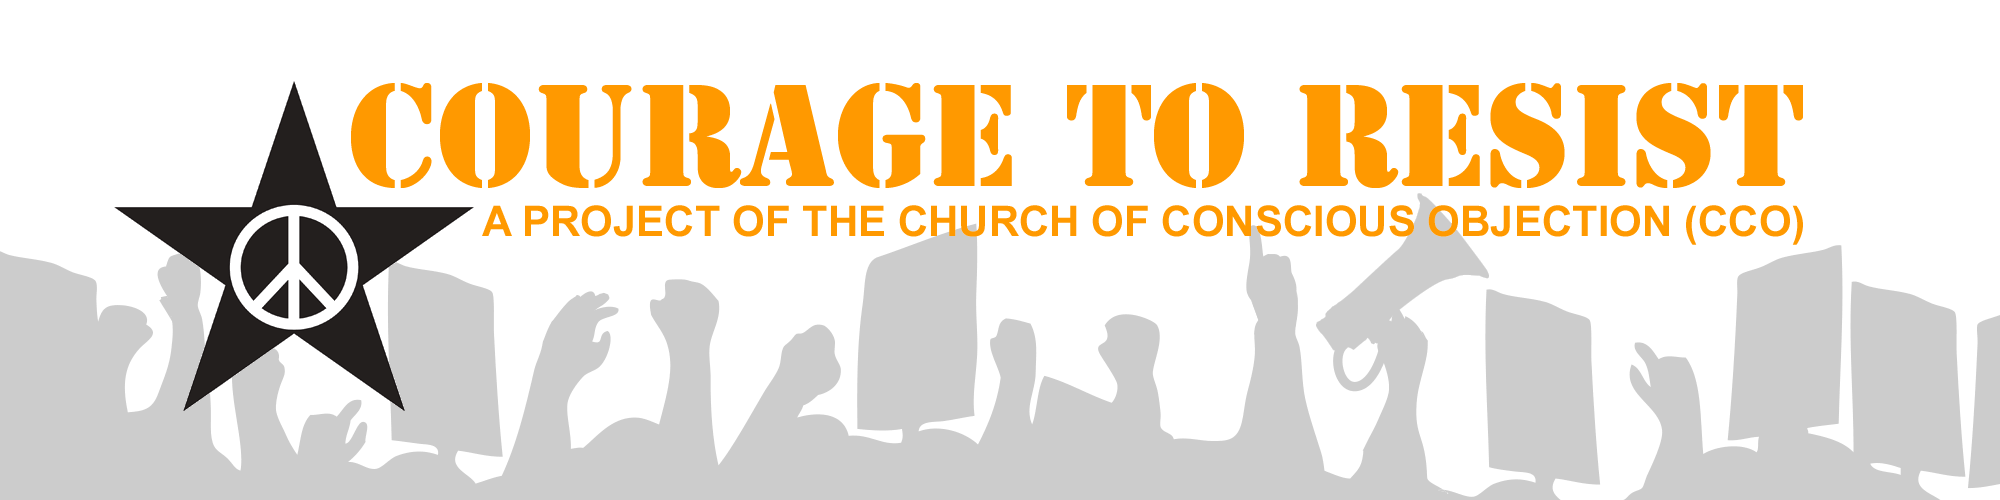 Courage to Resist / Objector Church logo